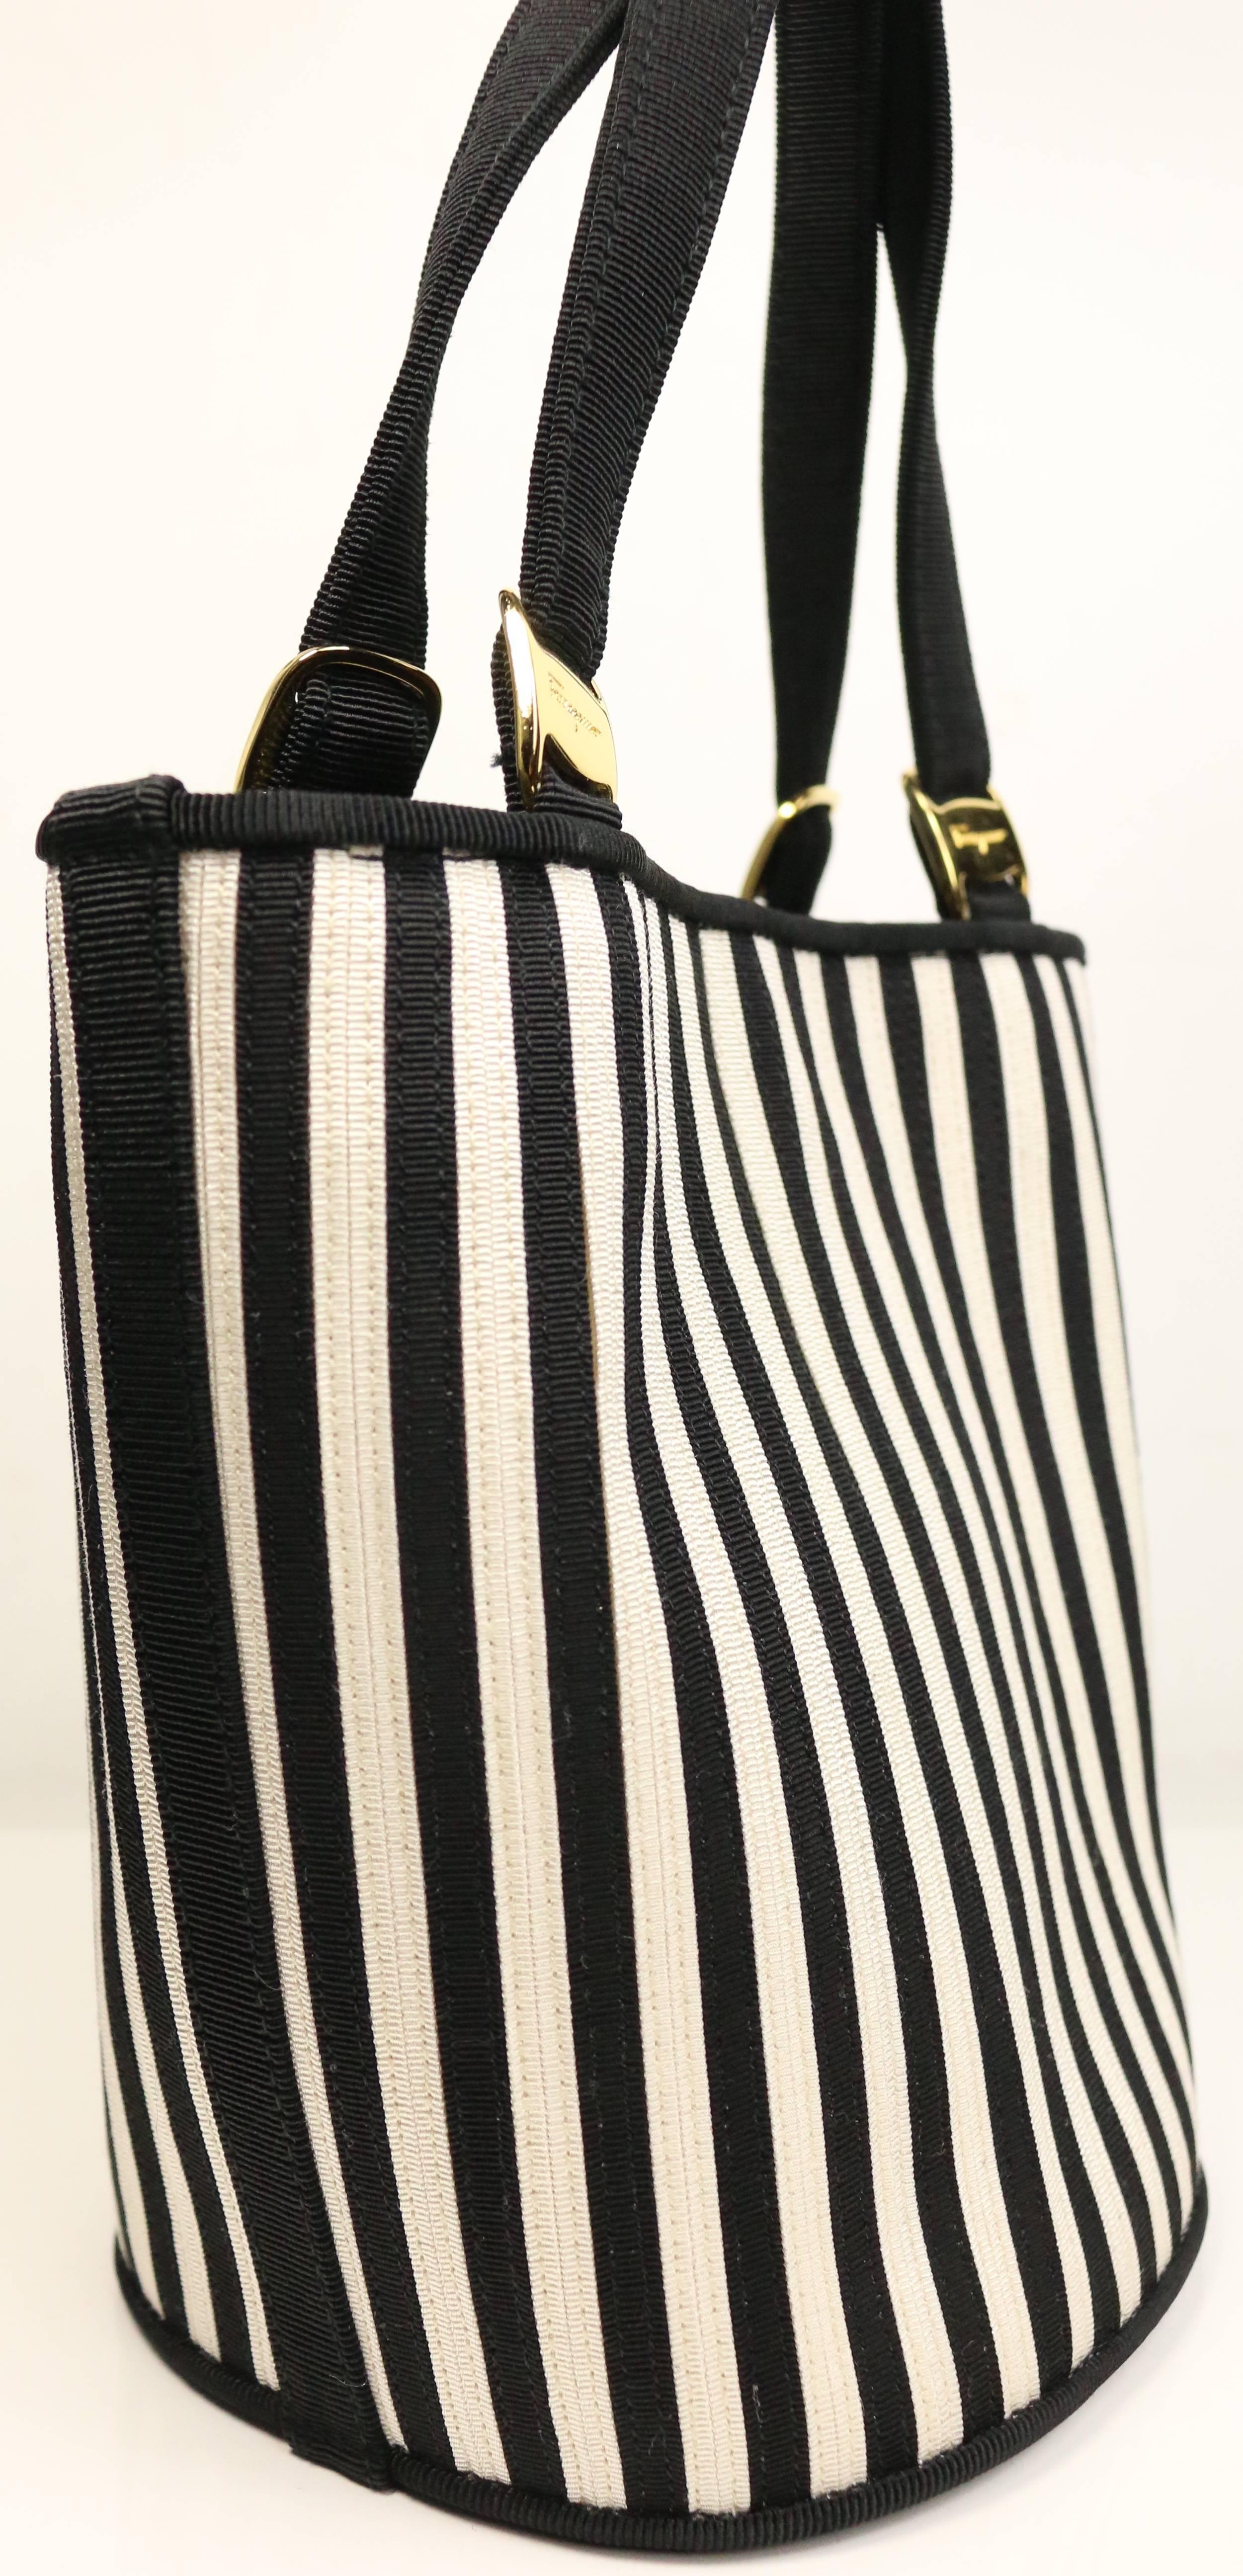 - This vintage 80s Salvatore Ferragamo black and white strap bucket handbag with detachable strap is made in rayon and cotton. Featuring a gold hardware hook closure, a strap that can be adjusted and interior zipper pocket. Versatile, classic and